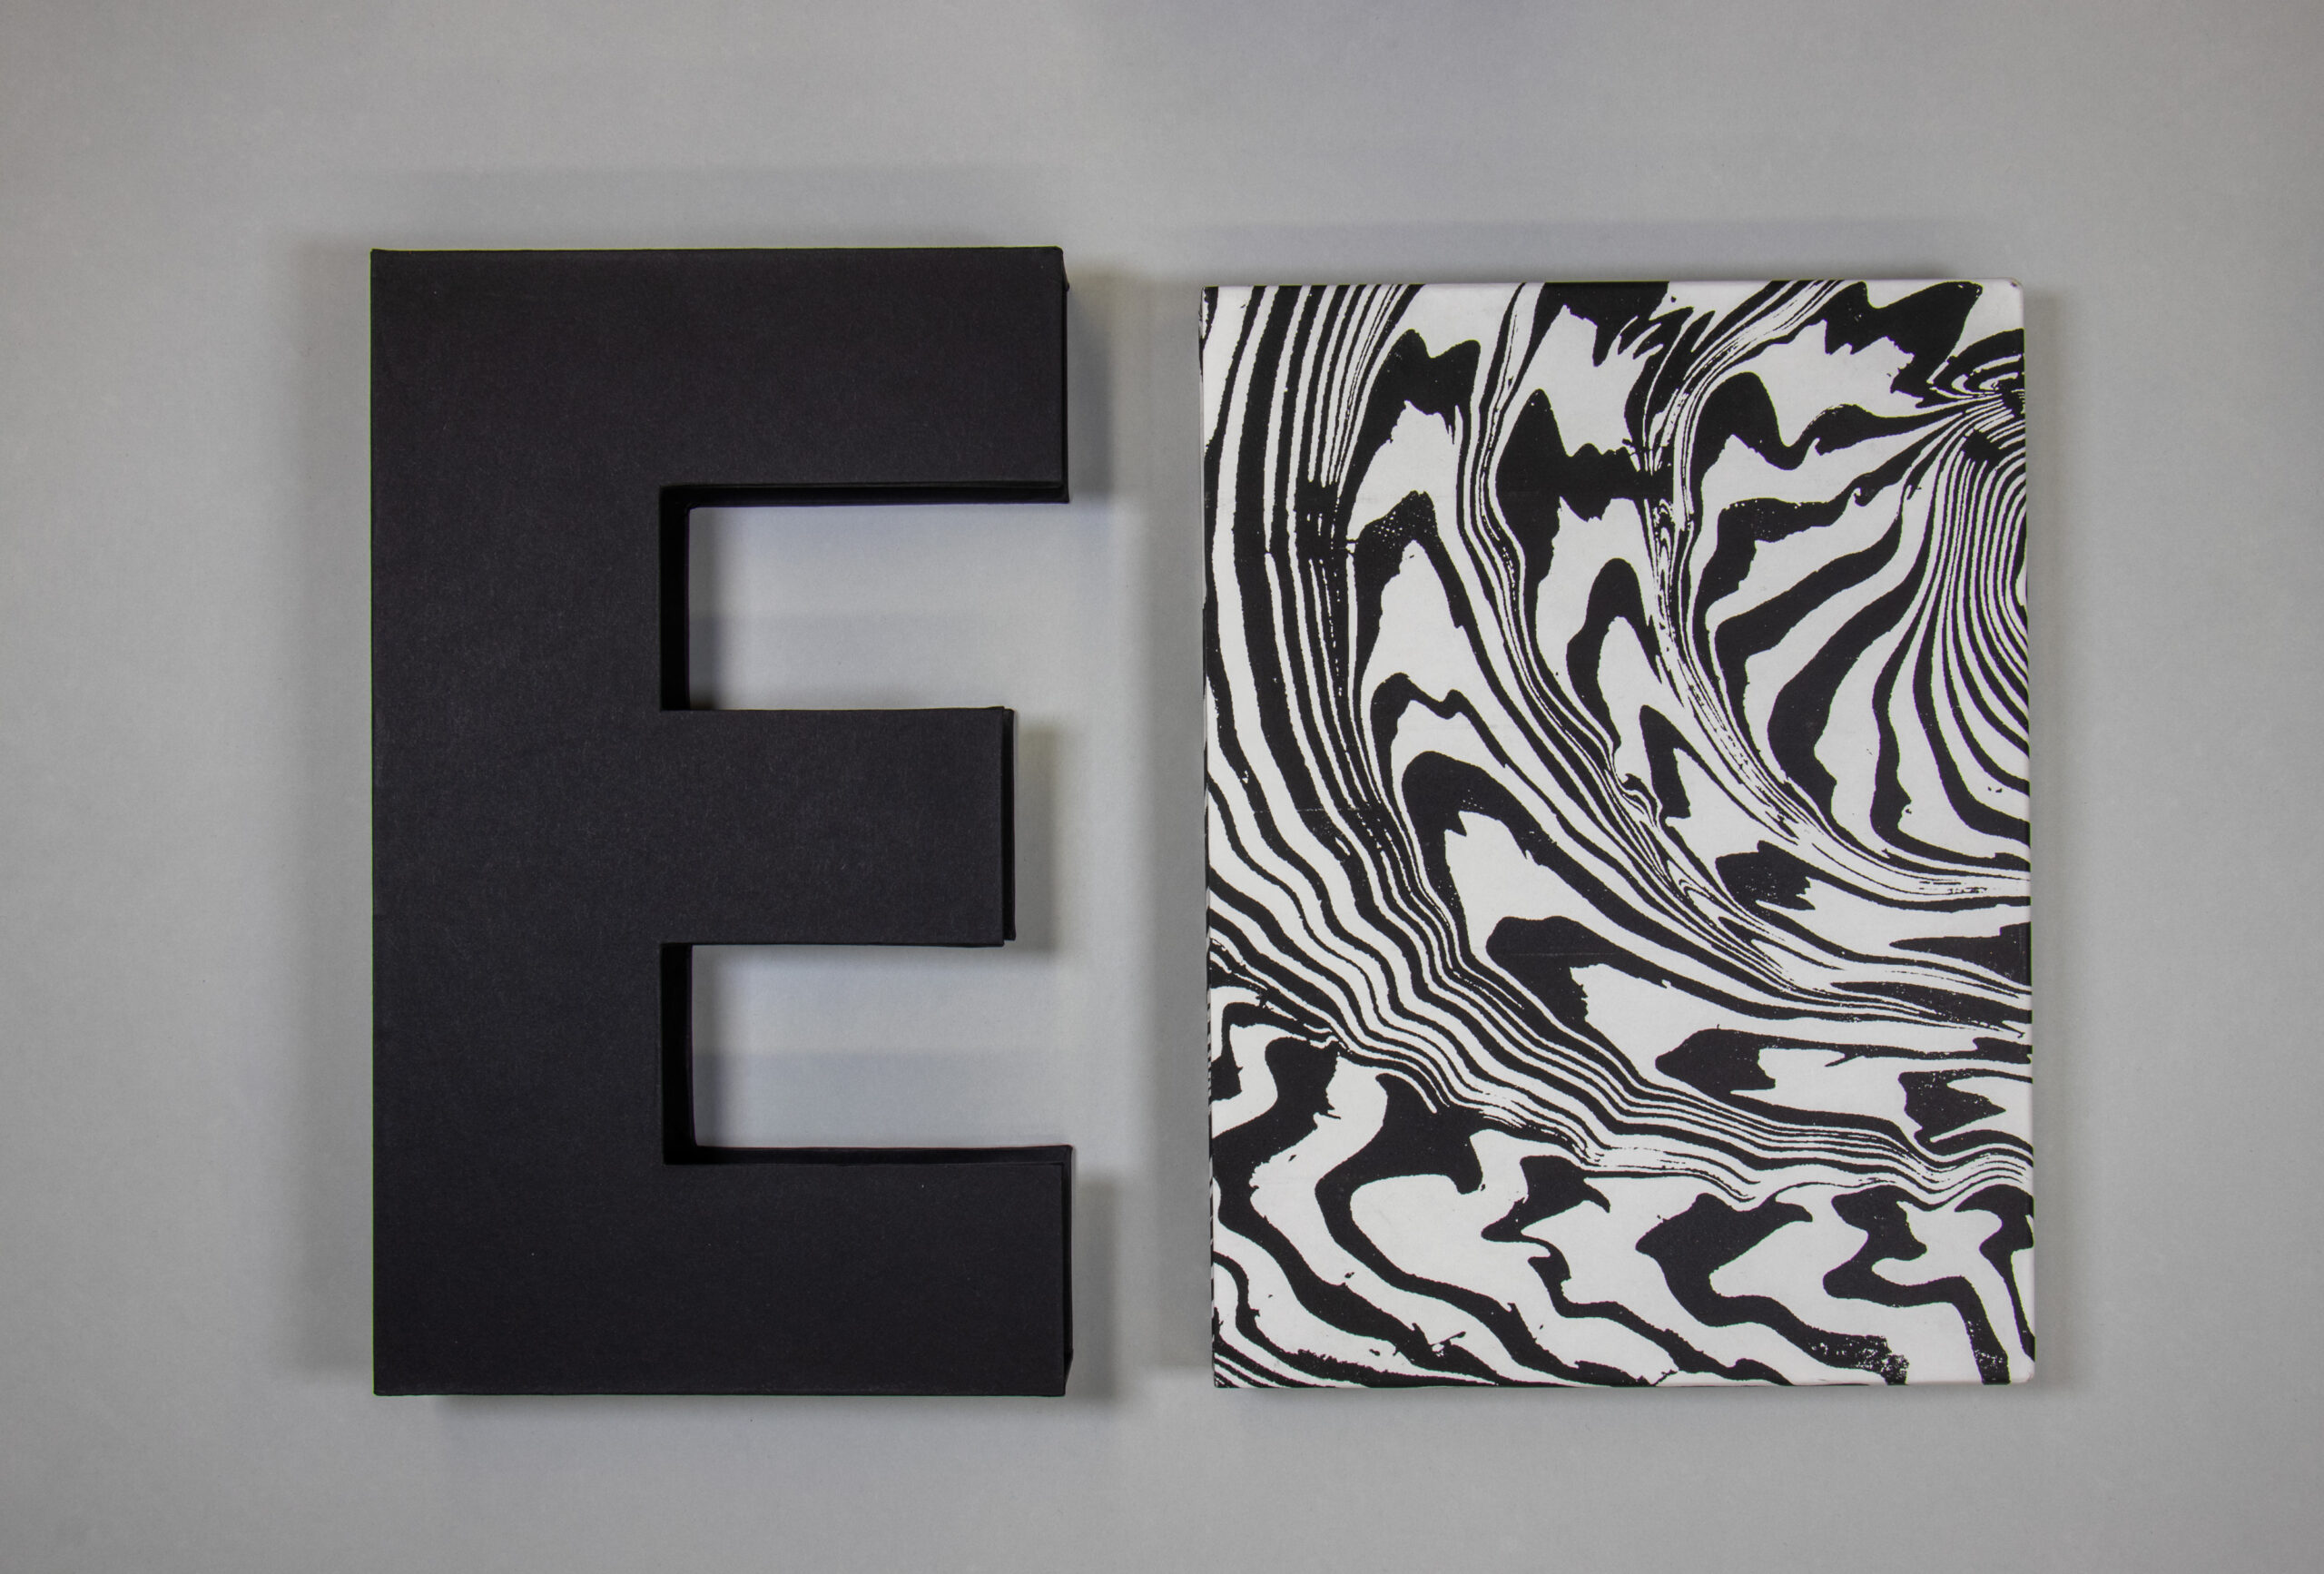 Two interlocking slipcases, on cut into the shape of an E and the other marbled in black and white.